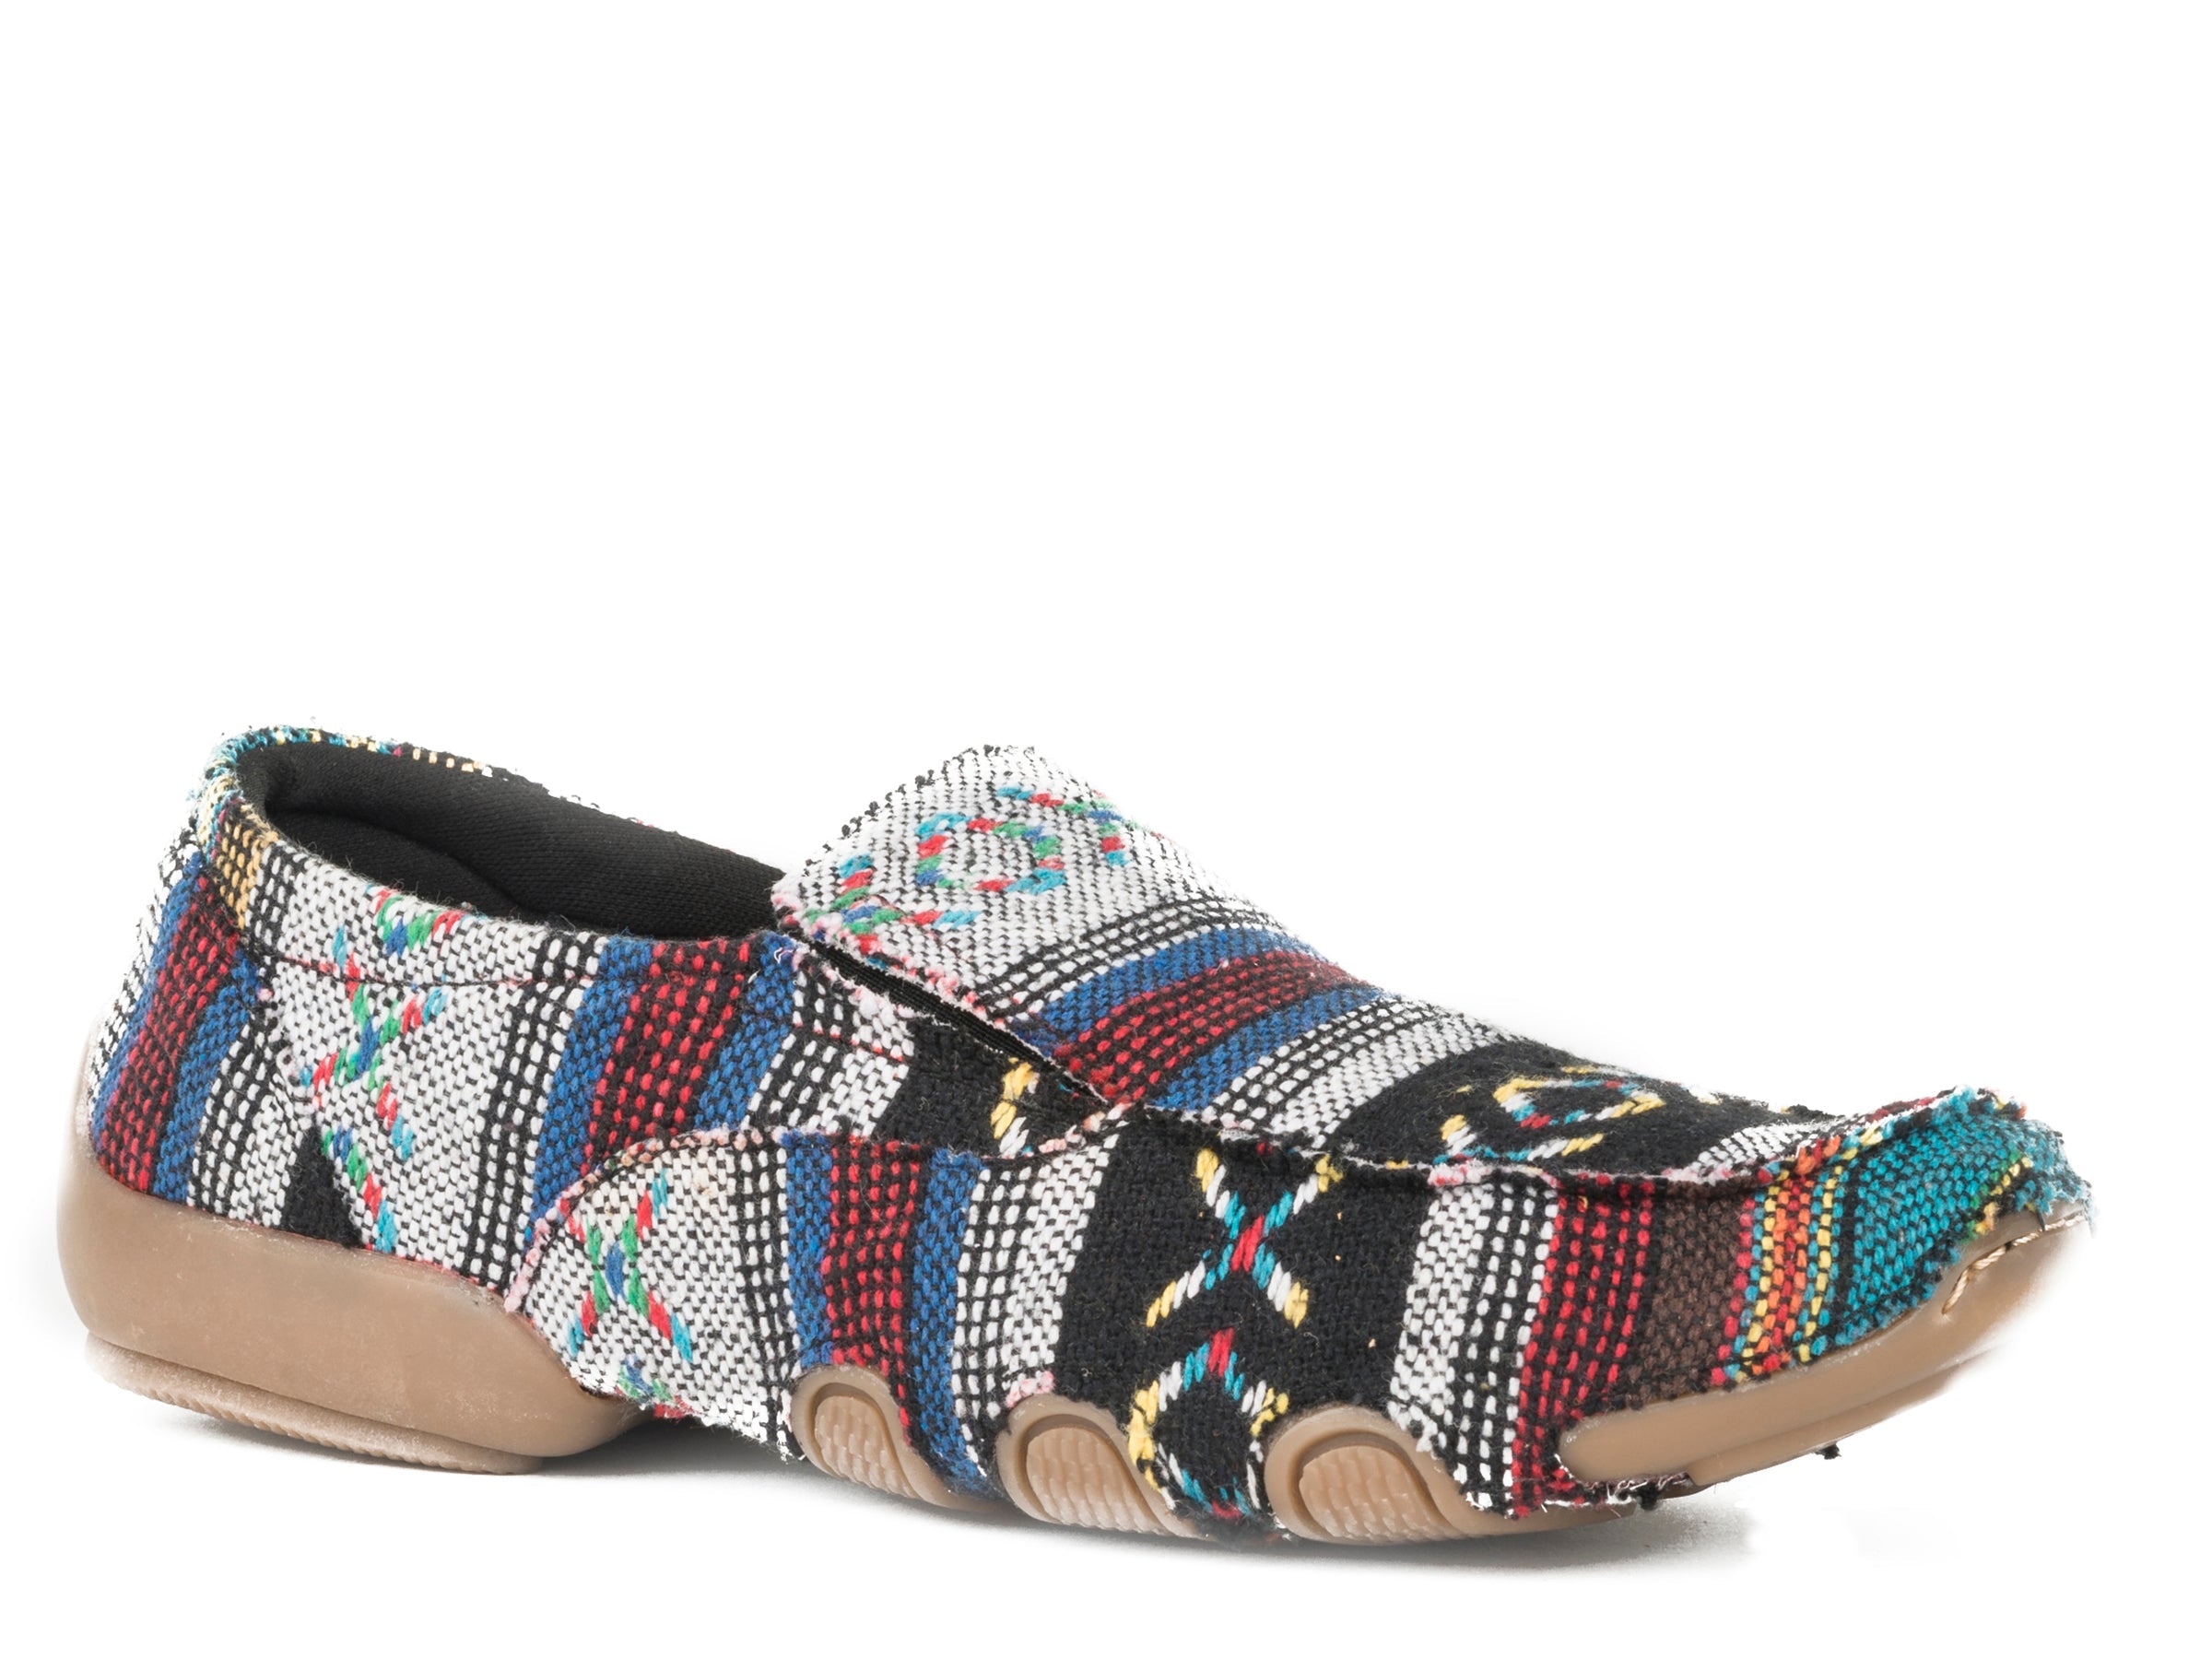 Roper Womens Driving Moc Multi Southwest Color Fabric With Fabric Wrapped Sole